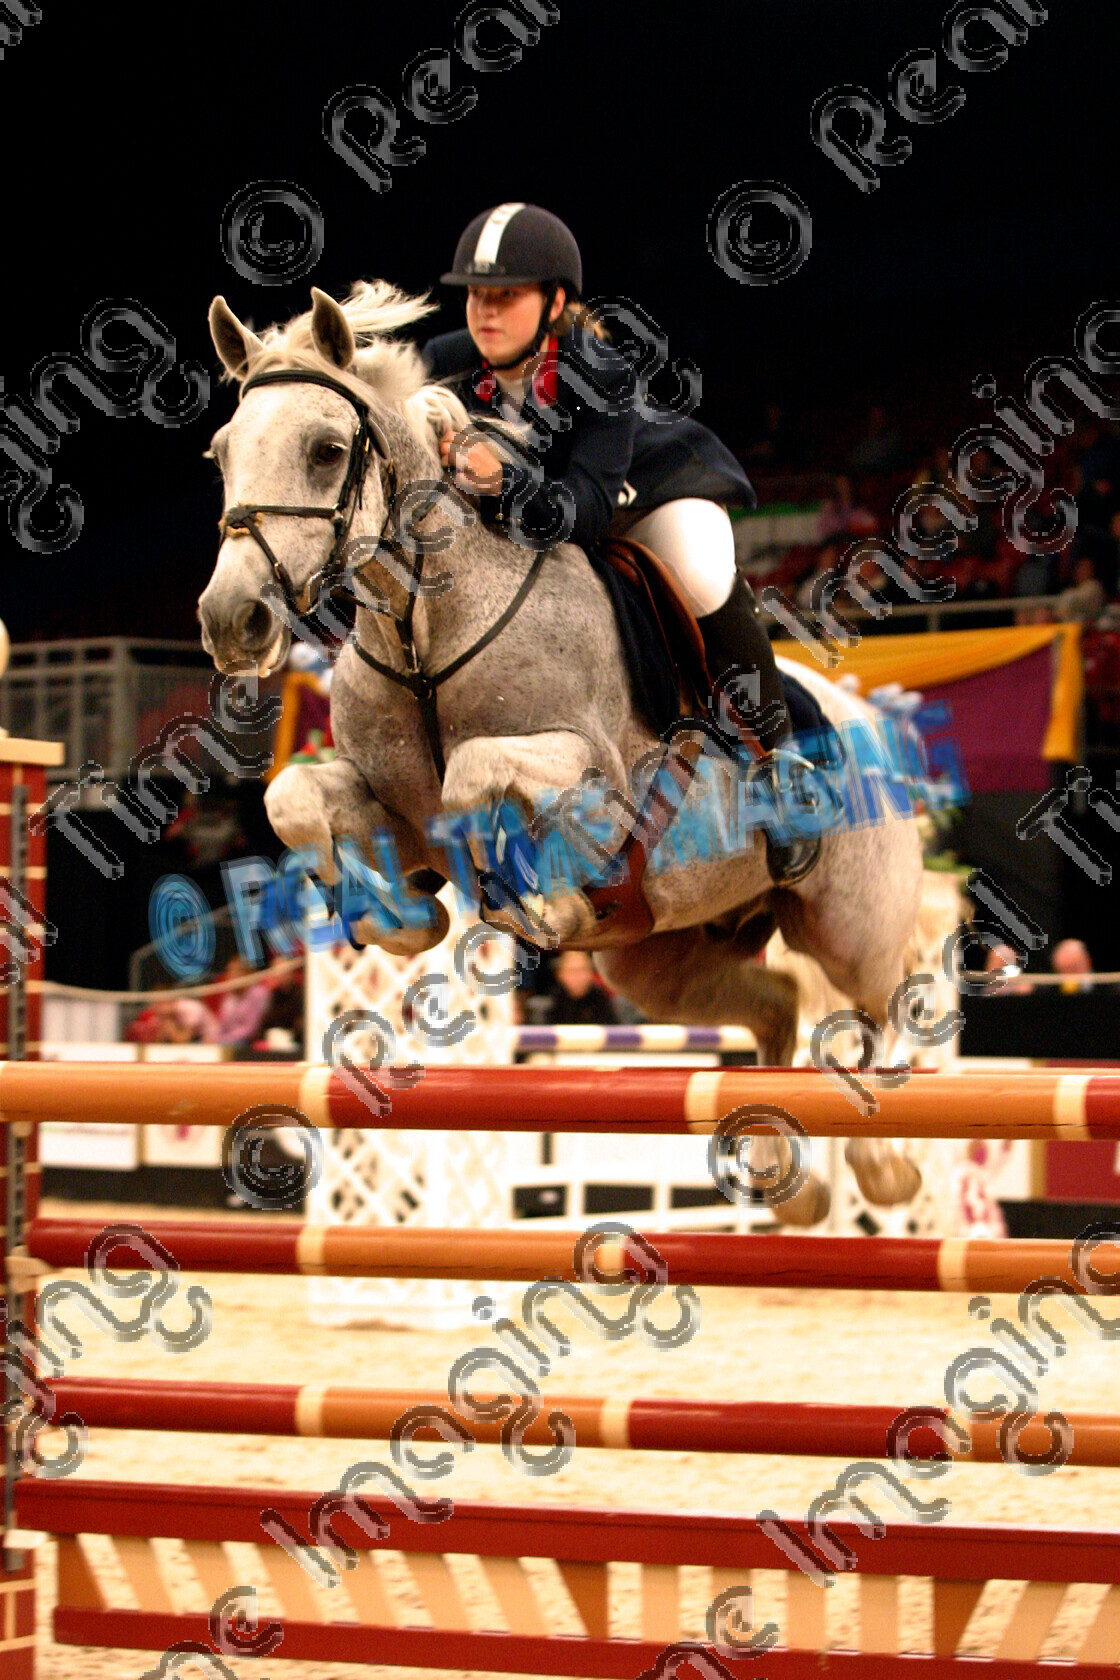 S05-64-M8-075 
 HOYS 2005: Squibb & Davies National Junior Foxhunter Championship winner 
 Keywords: horse of the year show 2005 05 hoys wednesday 12 10 october 3 Squibb & Davies National Junior Foxhunter Championship winner 197 who's bob claire bailey showjumper showjumping jump jumping fence action